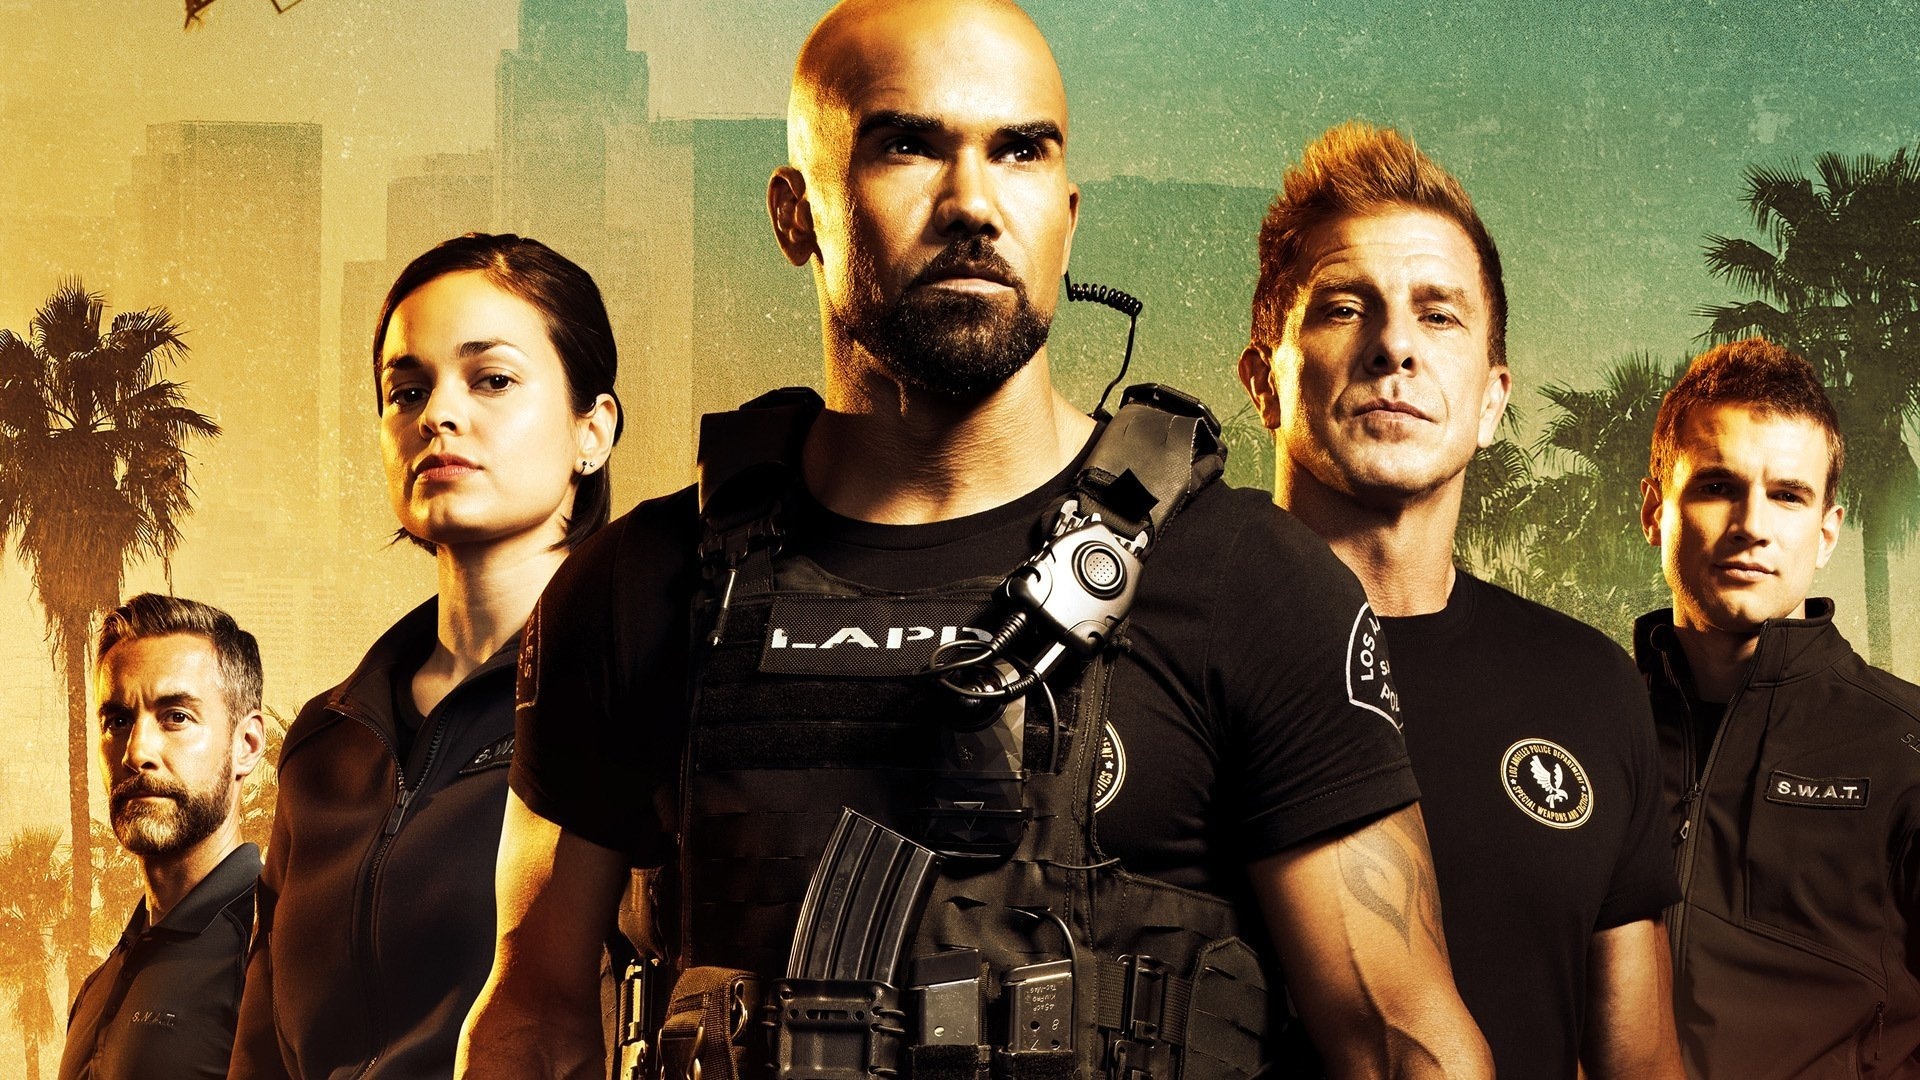 S. W. A. T. TV series, High-definition wallpapers, Action-packed show, Elite law enforcement, 1920x1080 Full HD Desktop